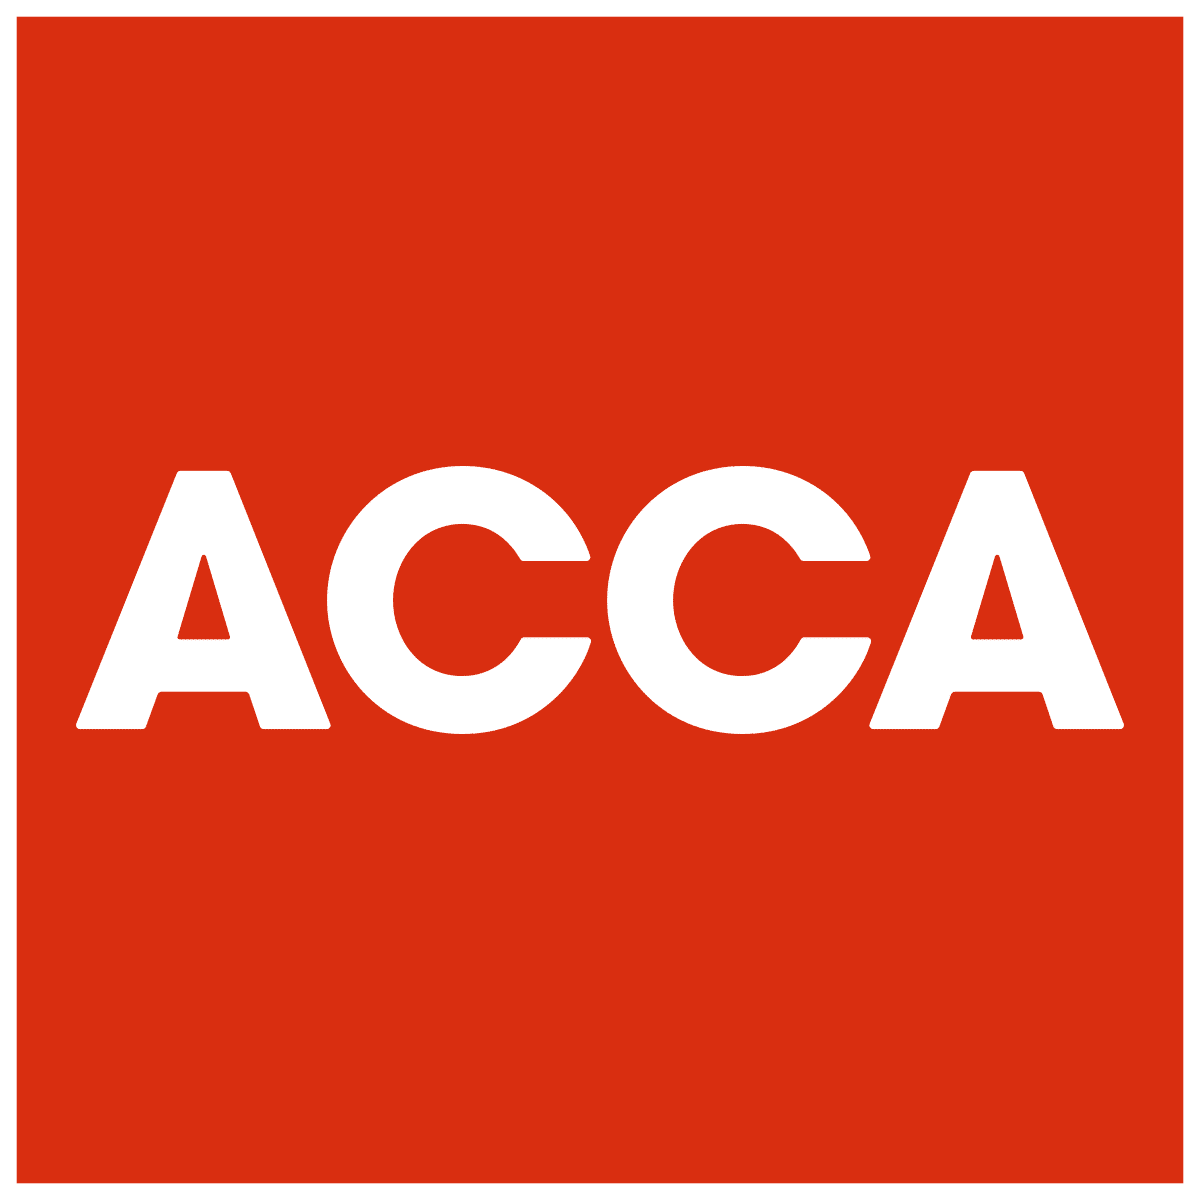 ACCA Logo (the Association of Chartered Certified Accountants)